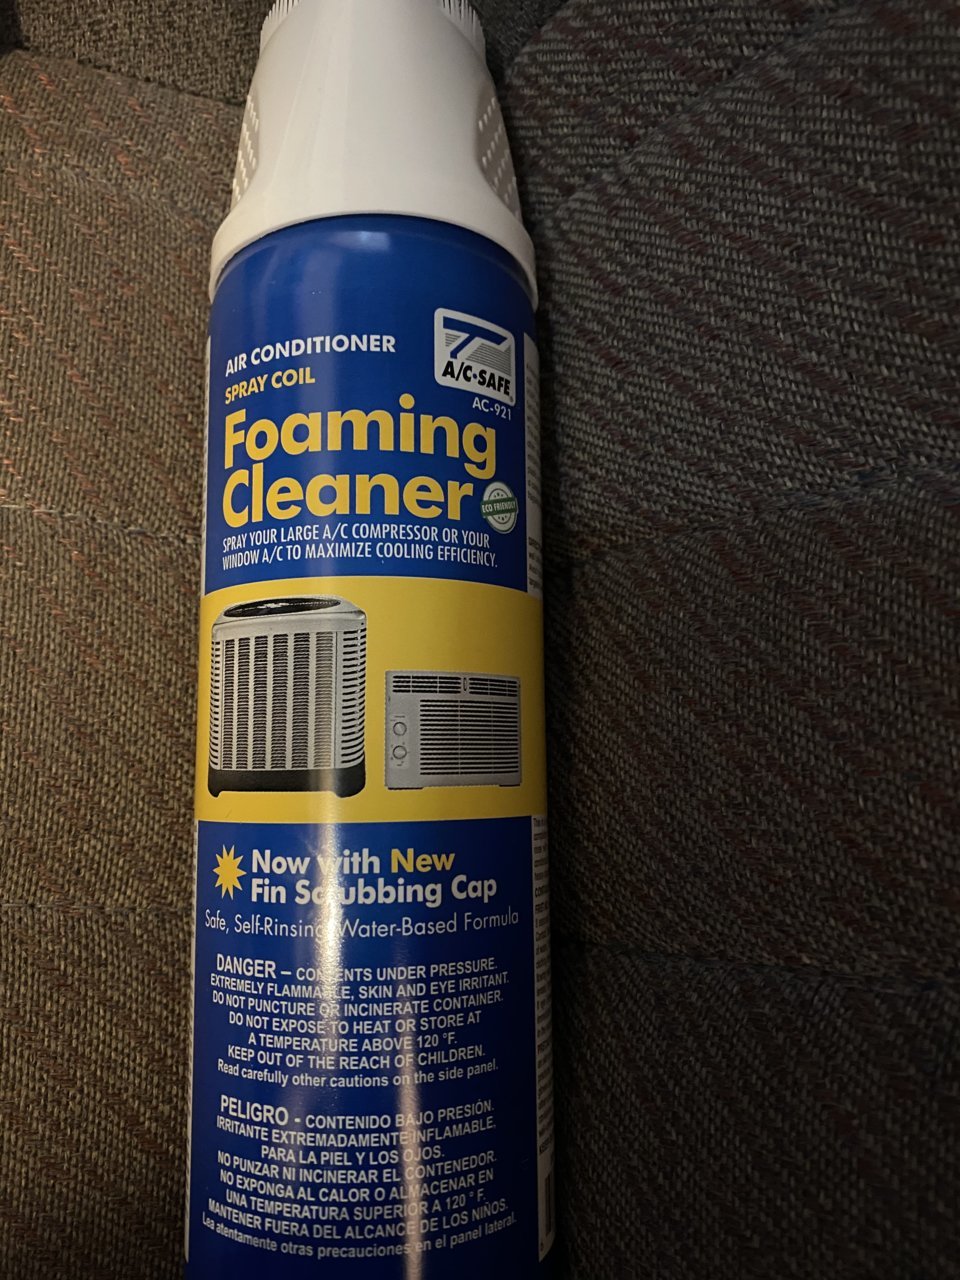 AC-Safe Air Conditioner Foaming Spray Coil Cleaner Self-rinsing (2 Pack) -  NEW